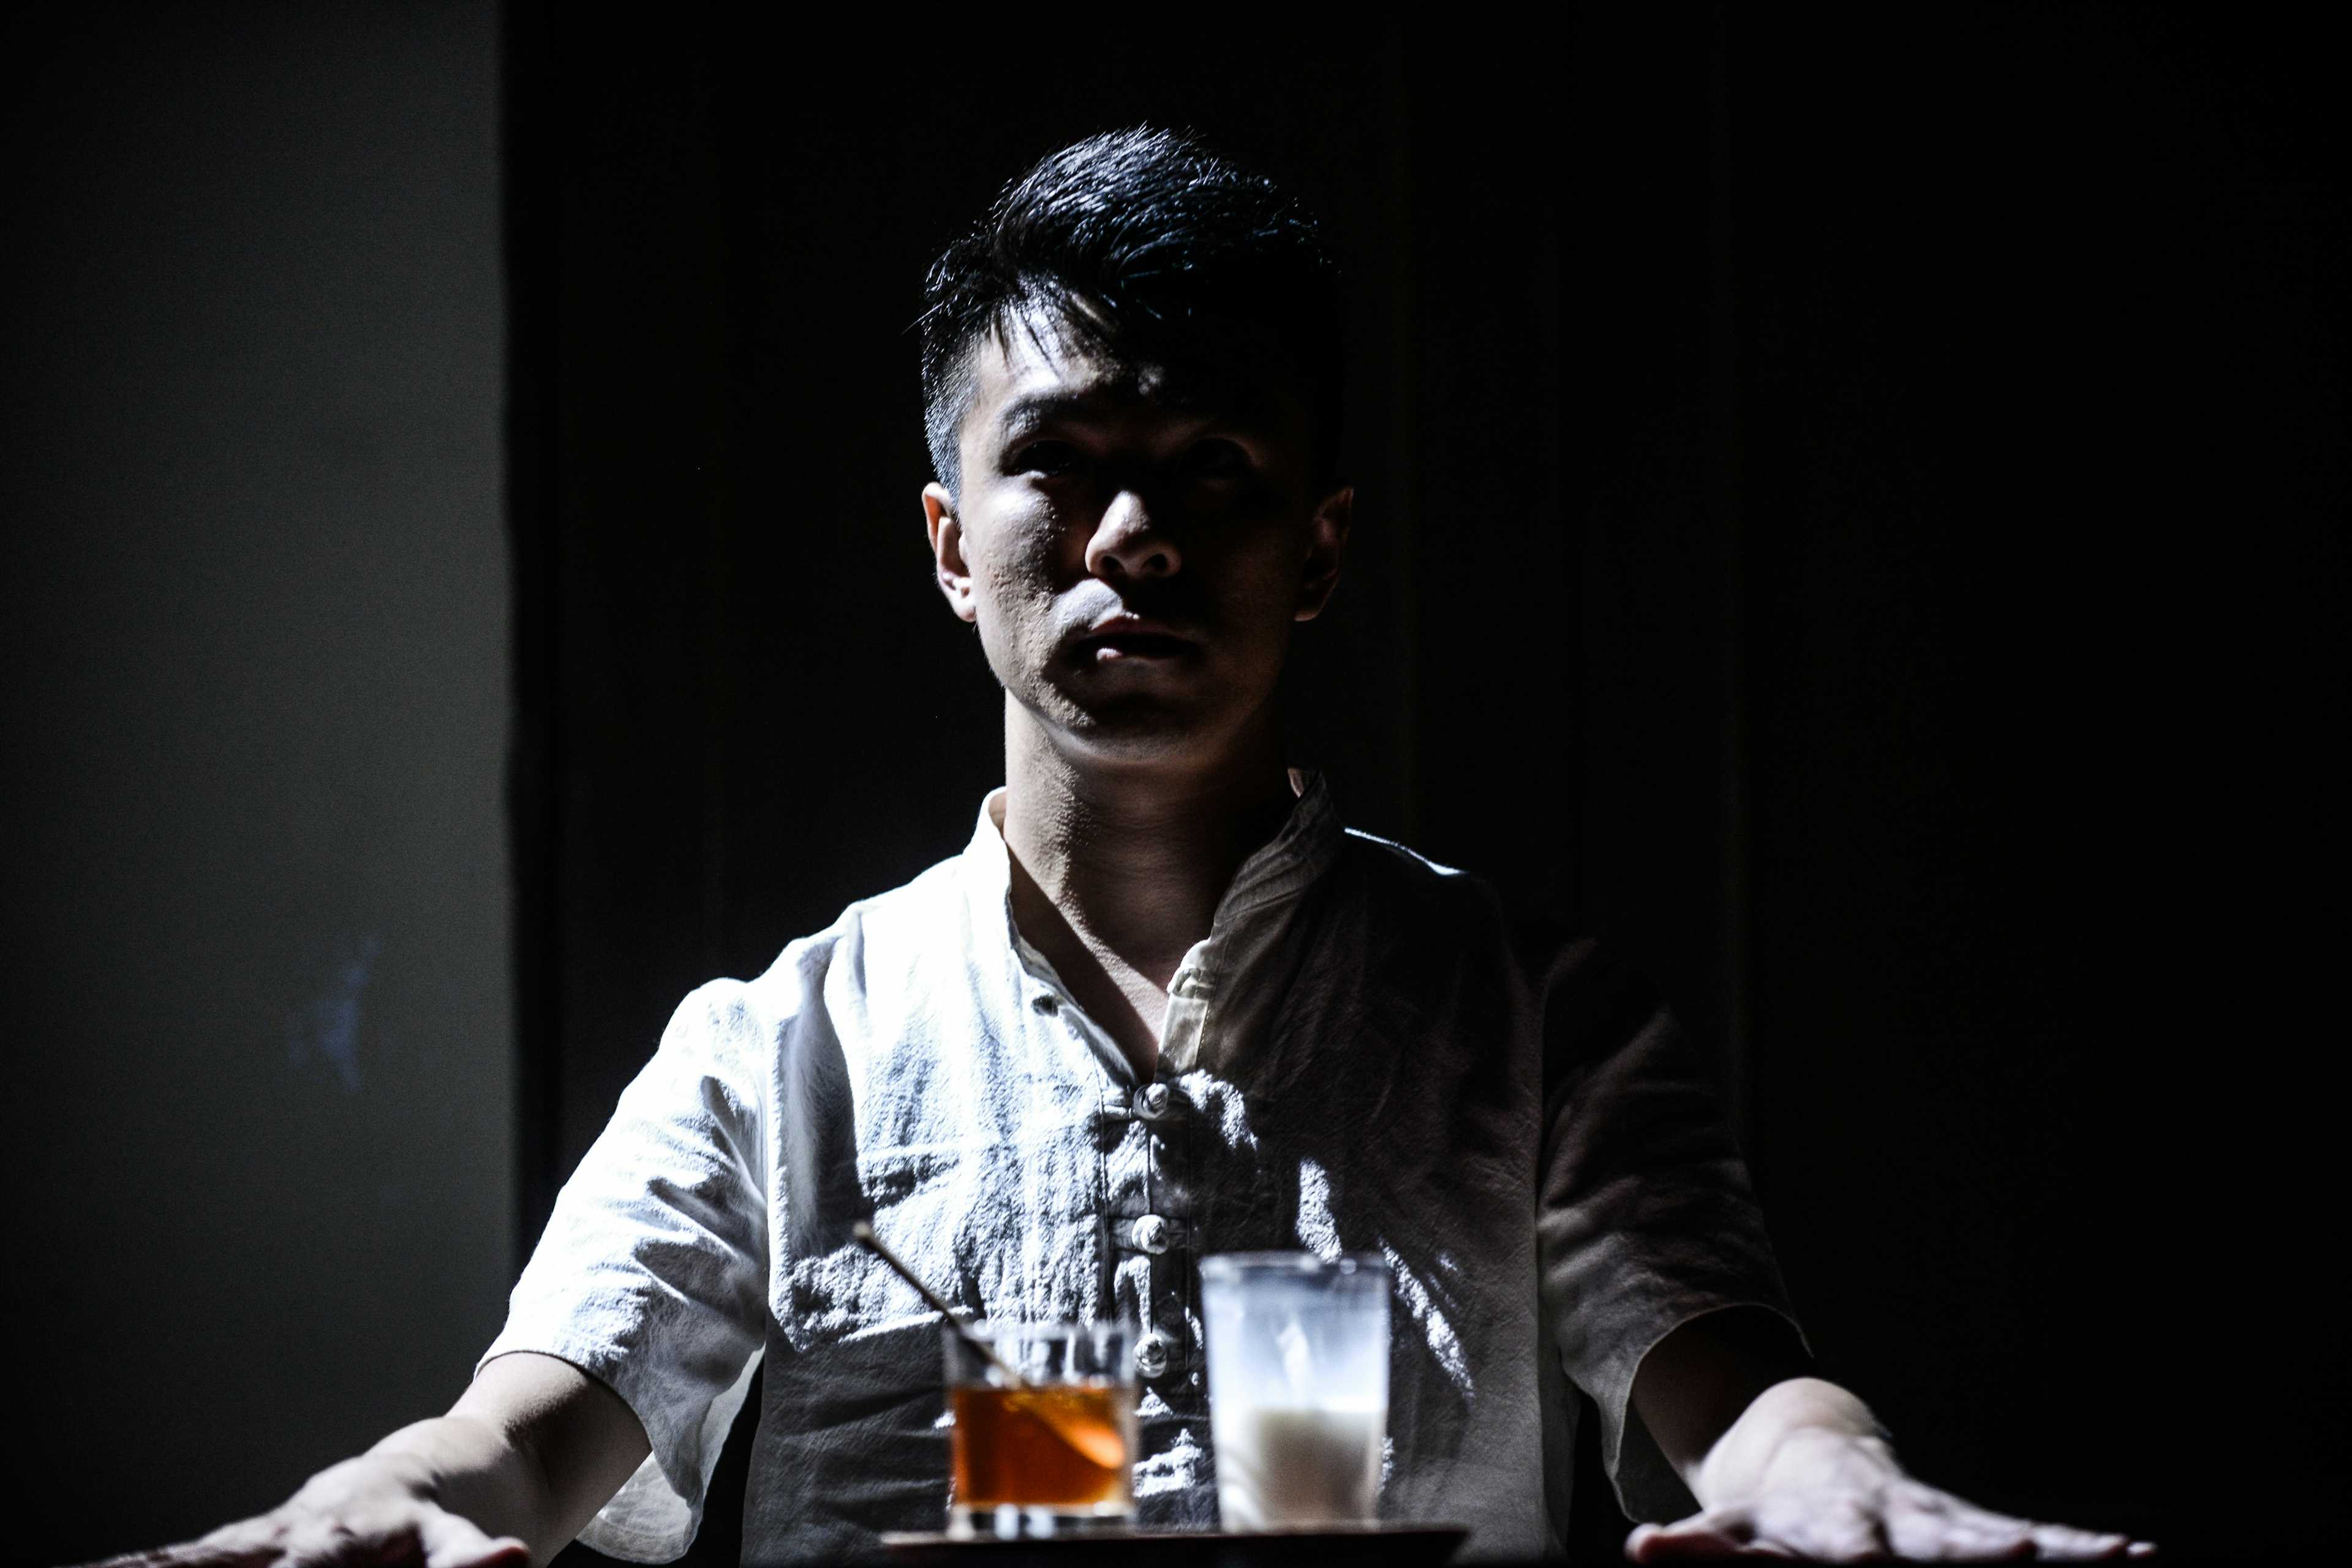 Milk and Honey | Featuring: Billy Sy | Tagged as: Milk and Honey, Show | Photo: Fung Wai Sun |  (Rooftop Productions • Hong Kong Theatre Company)  | Rooftop Productions • Hong Kong Theatre Company